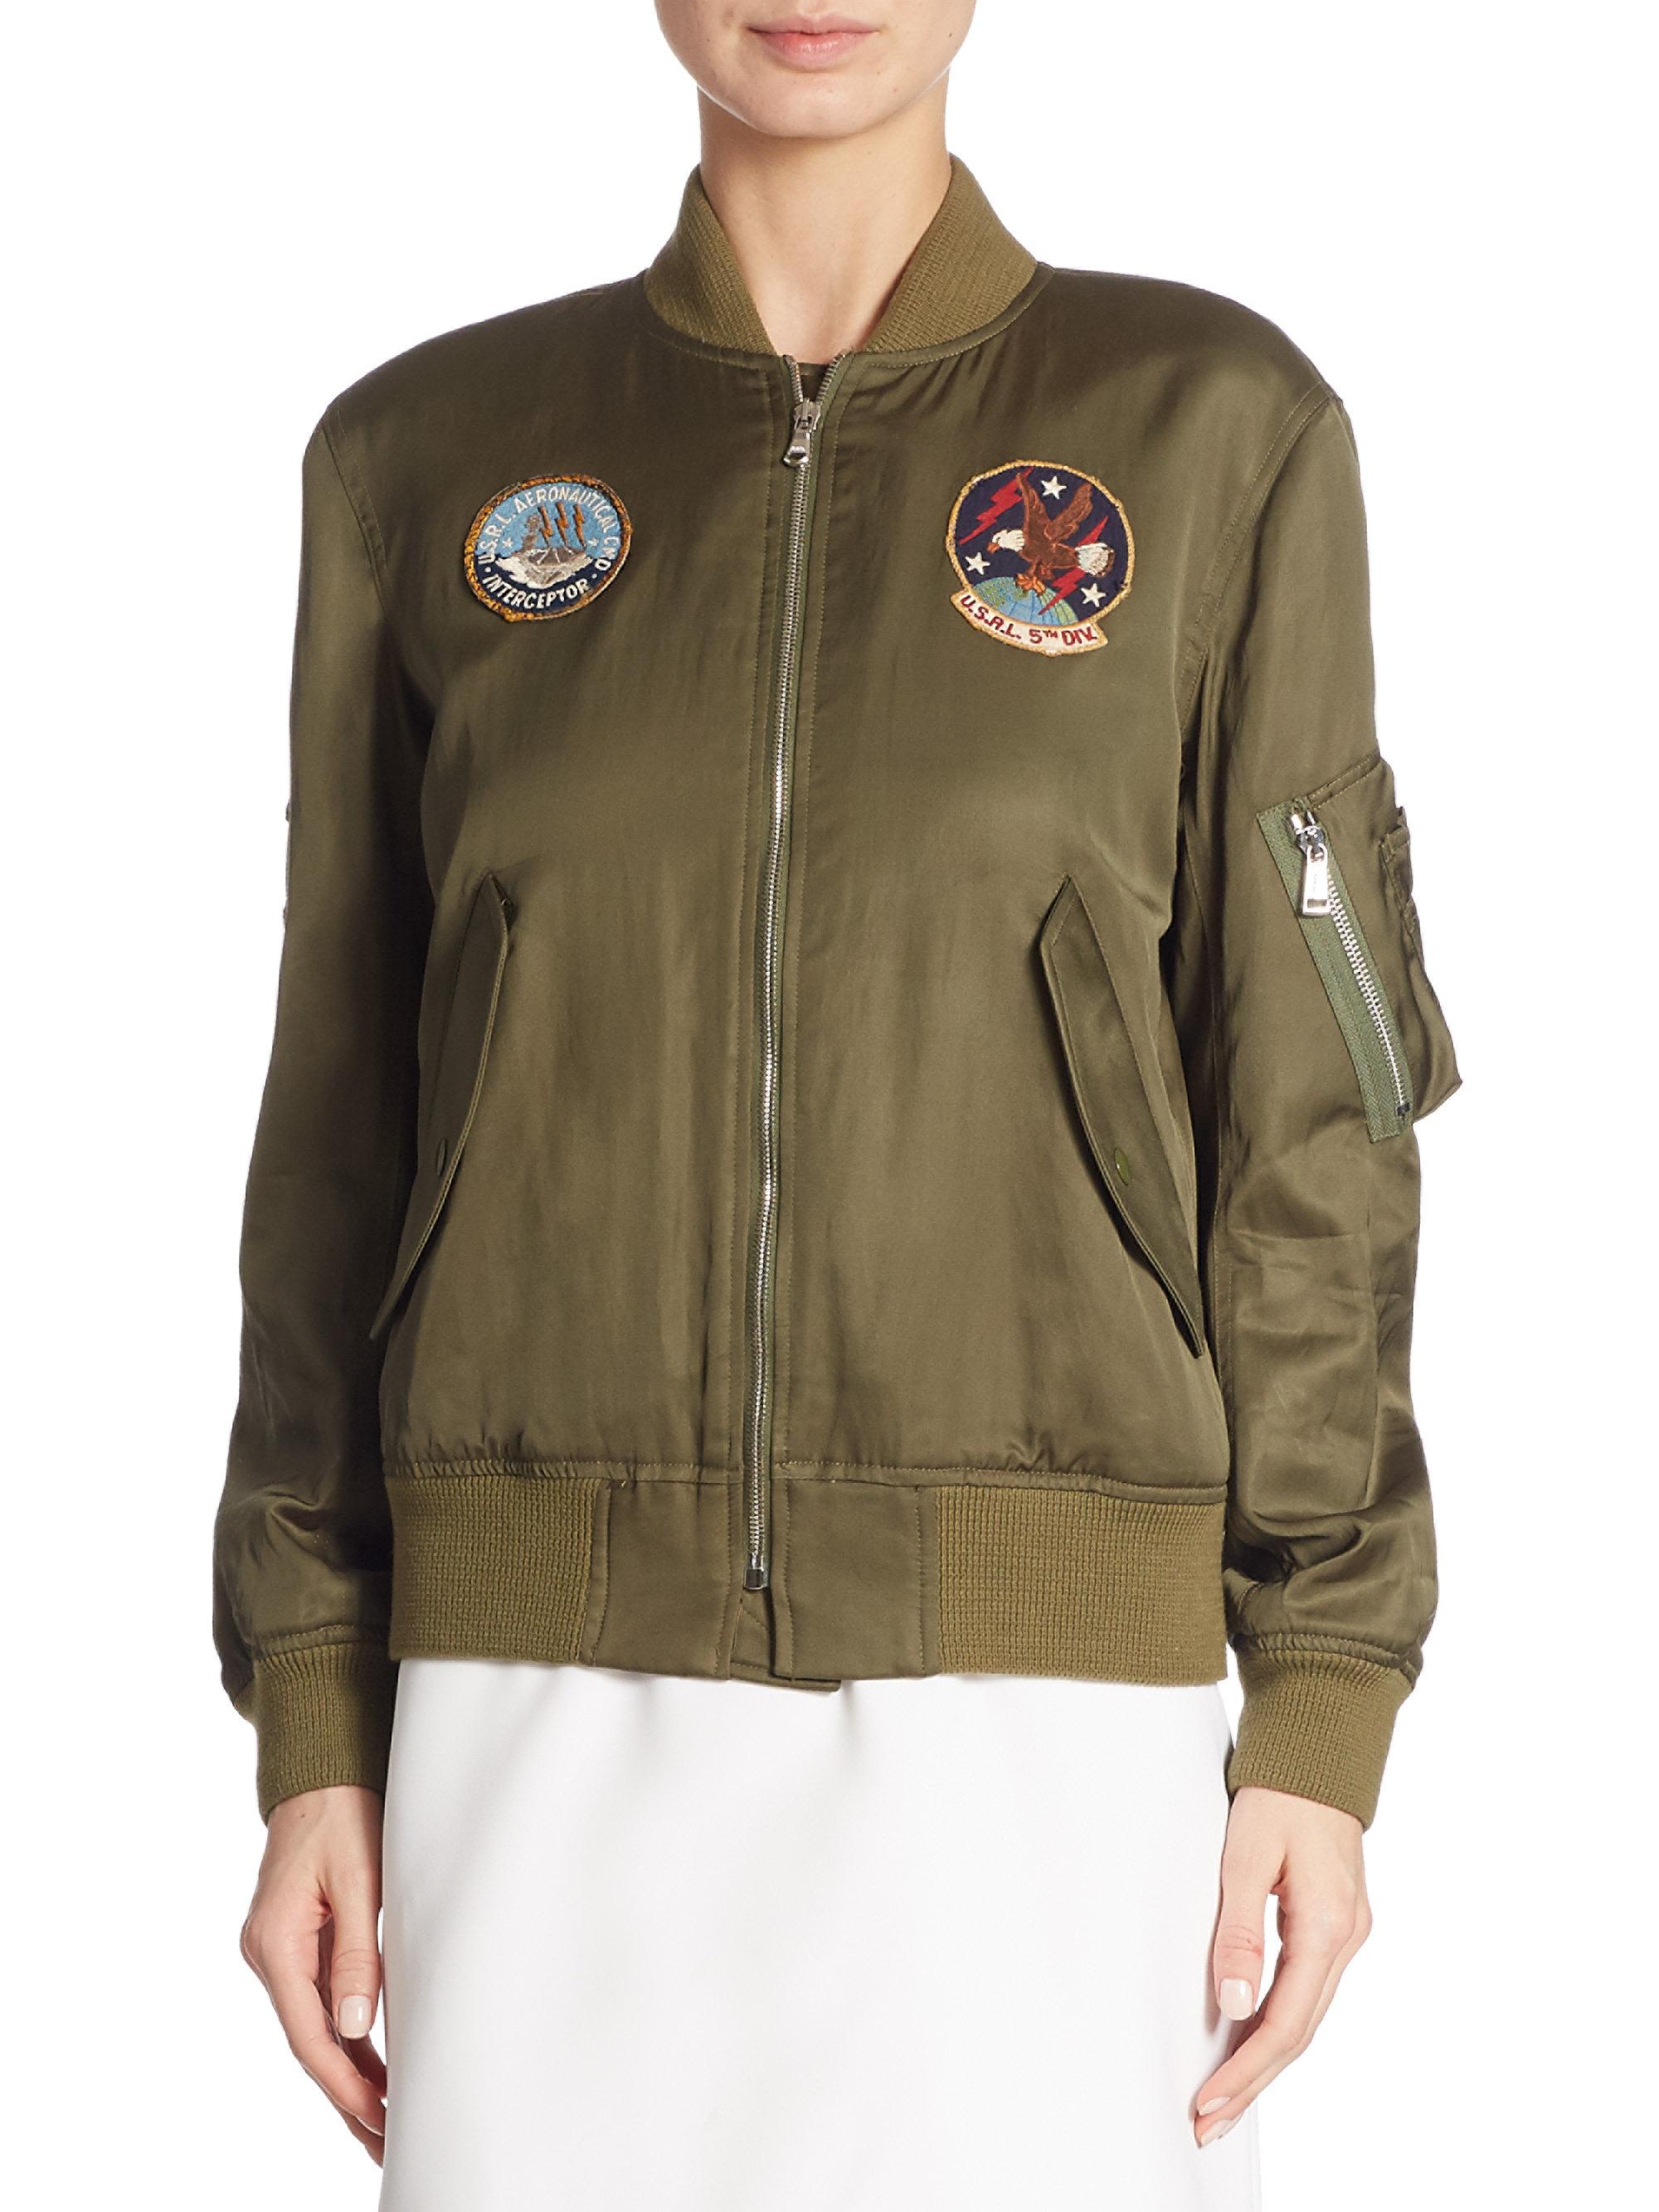 Lyst - Polo Ralph Lauren Embroidered Satin Bomber Jacket in Green